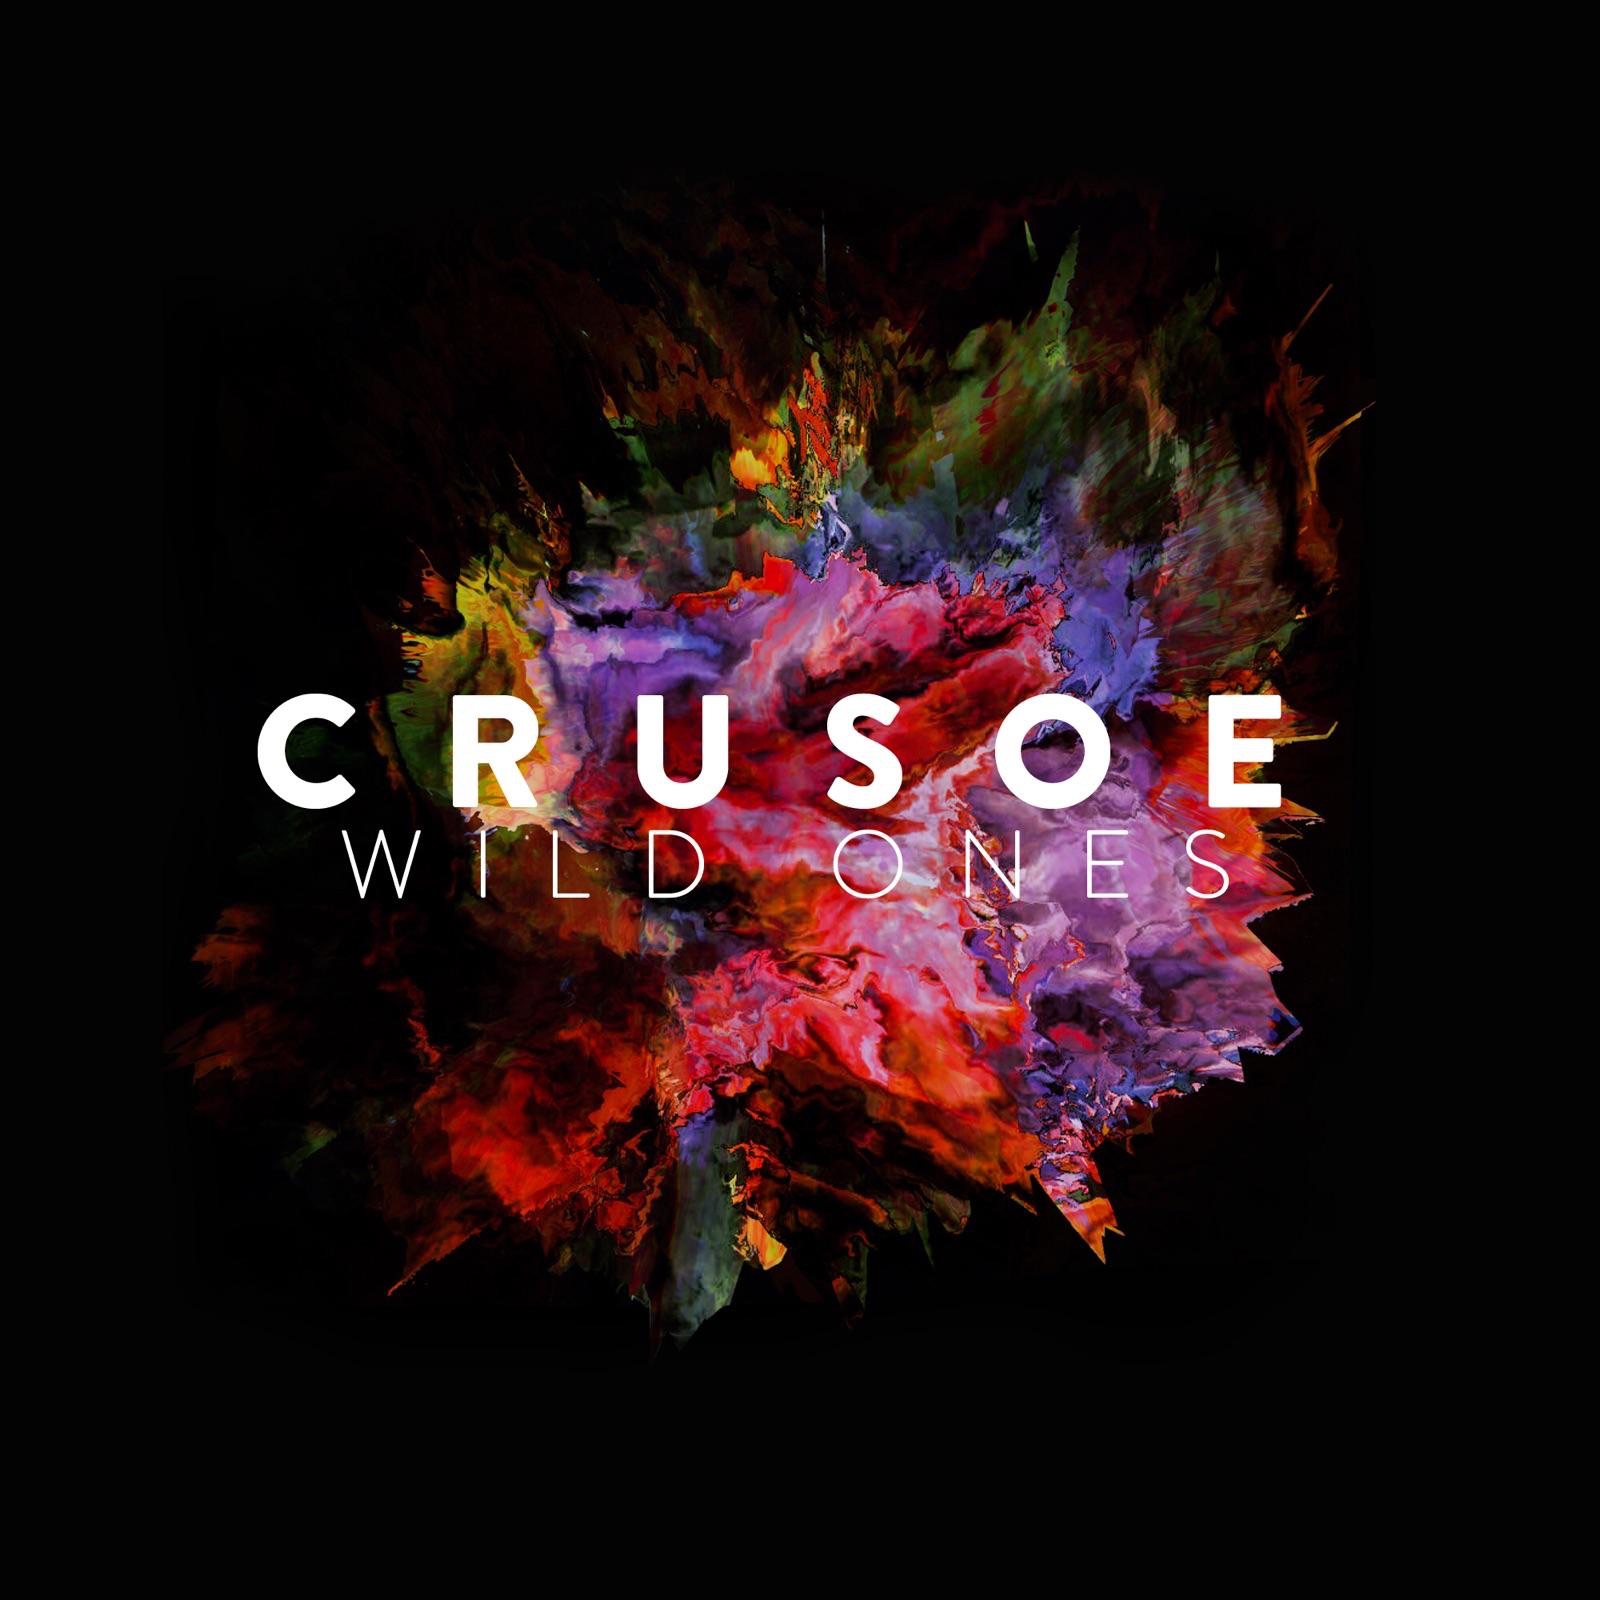 Art for Wild Ones by Crusoe